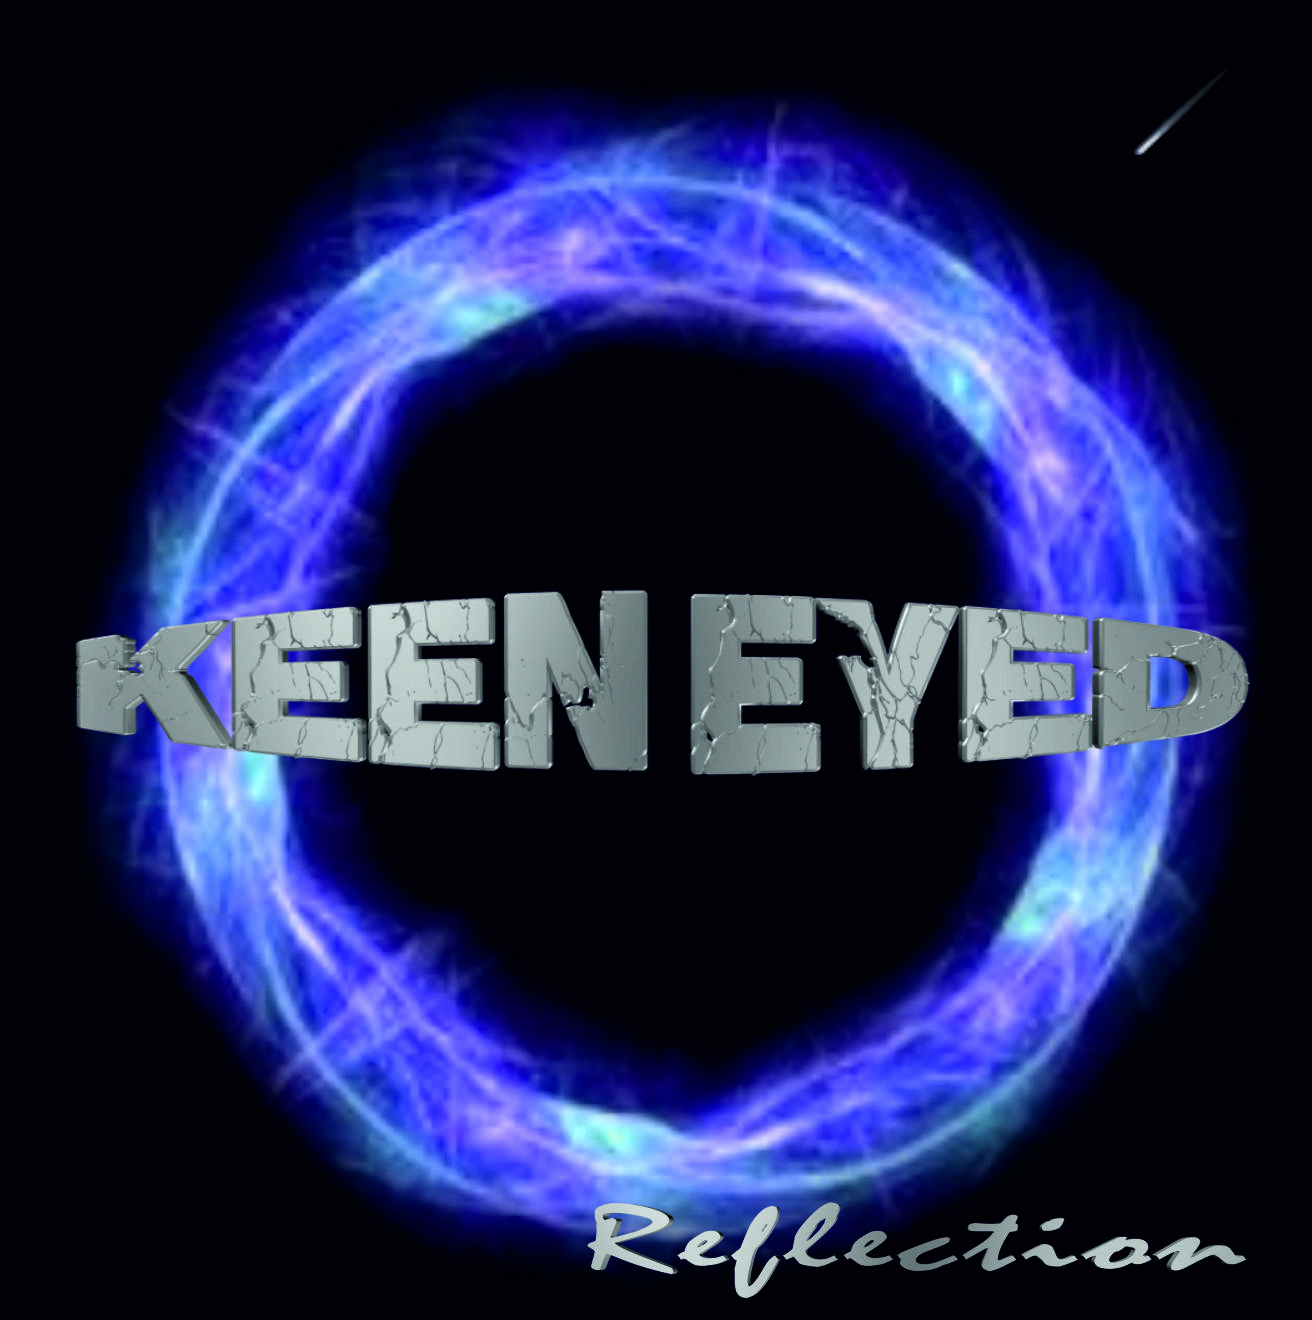 Keen Eyed - Reflection